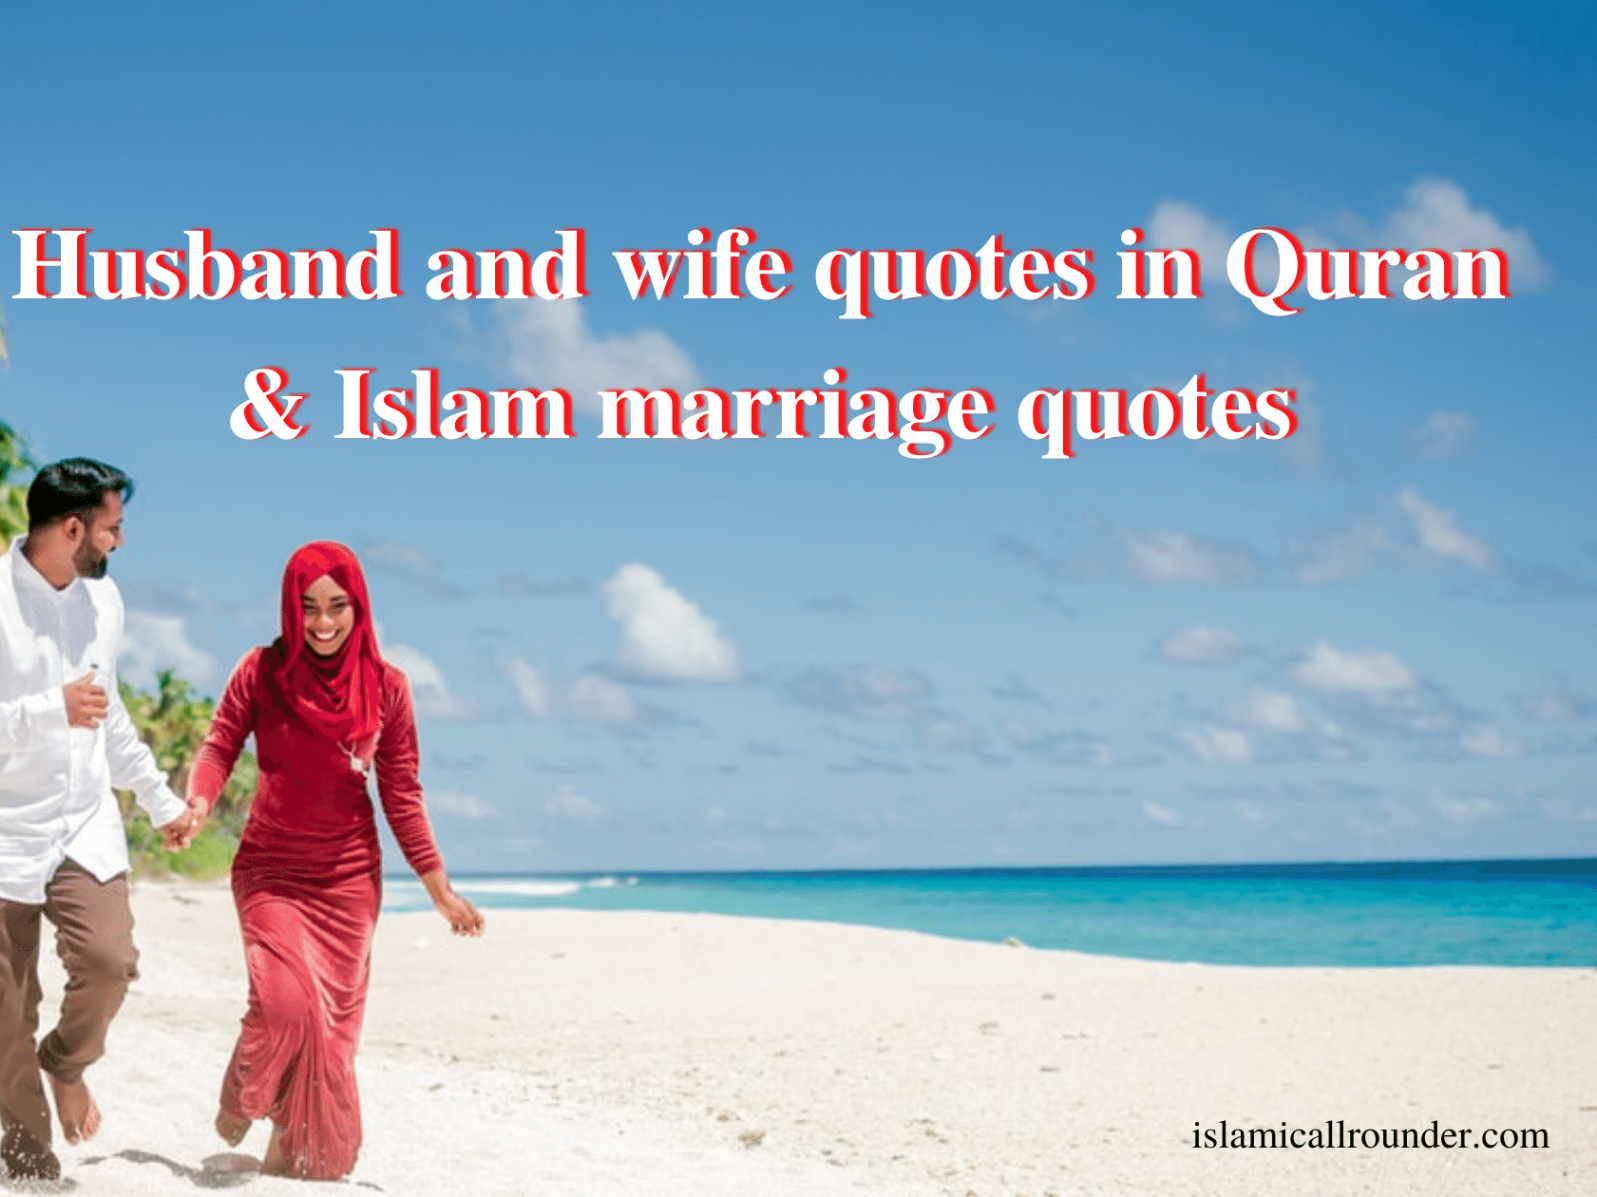 Husband and wife quotes in Quran & Islam marriage quotes by ...